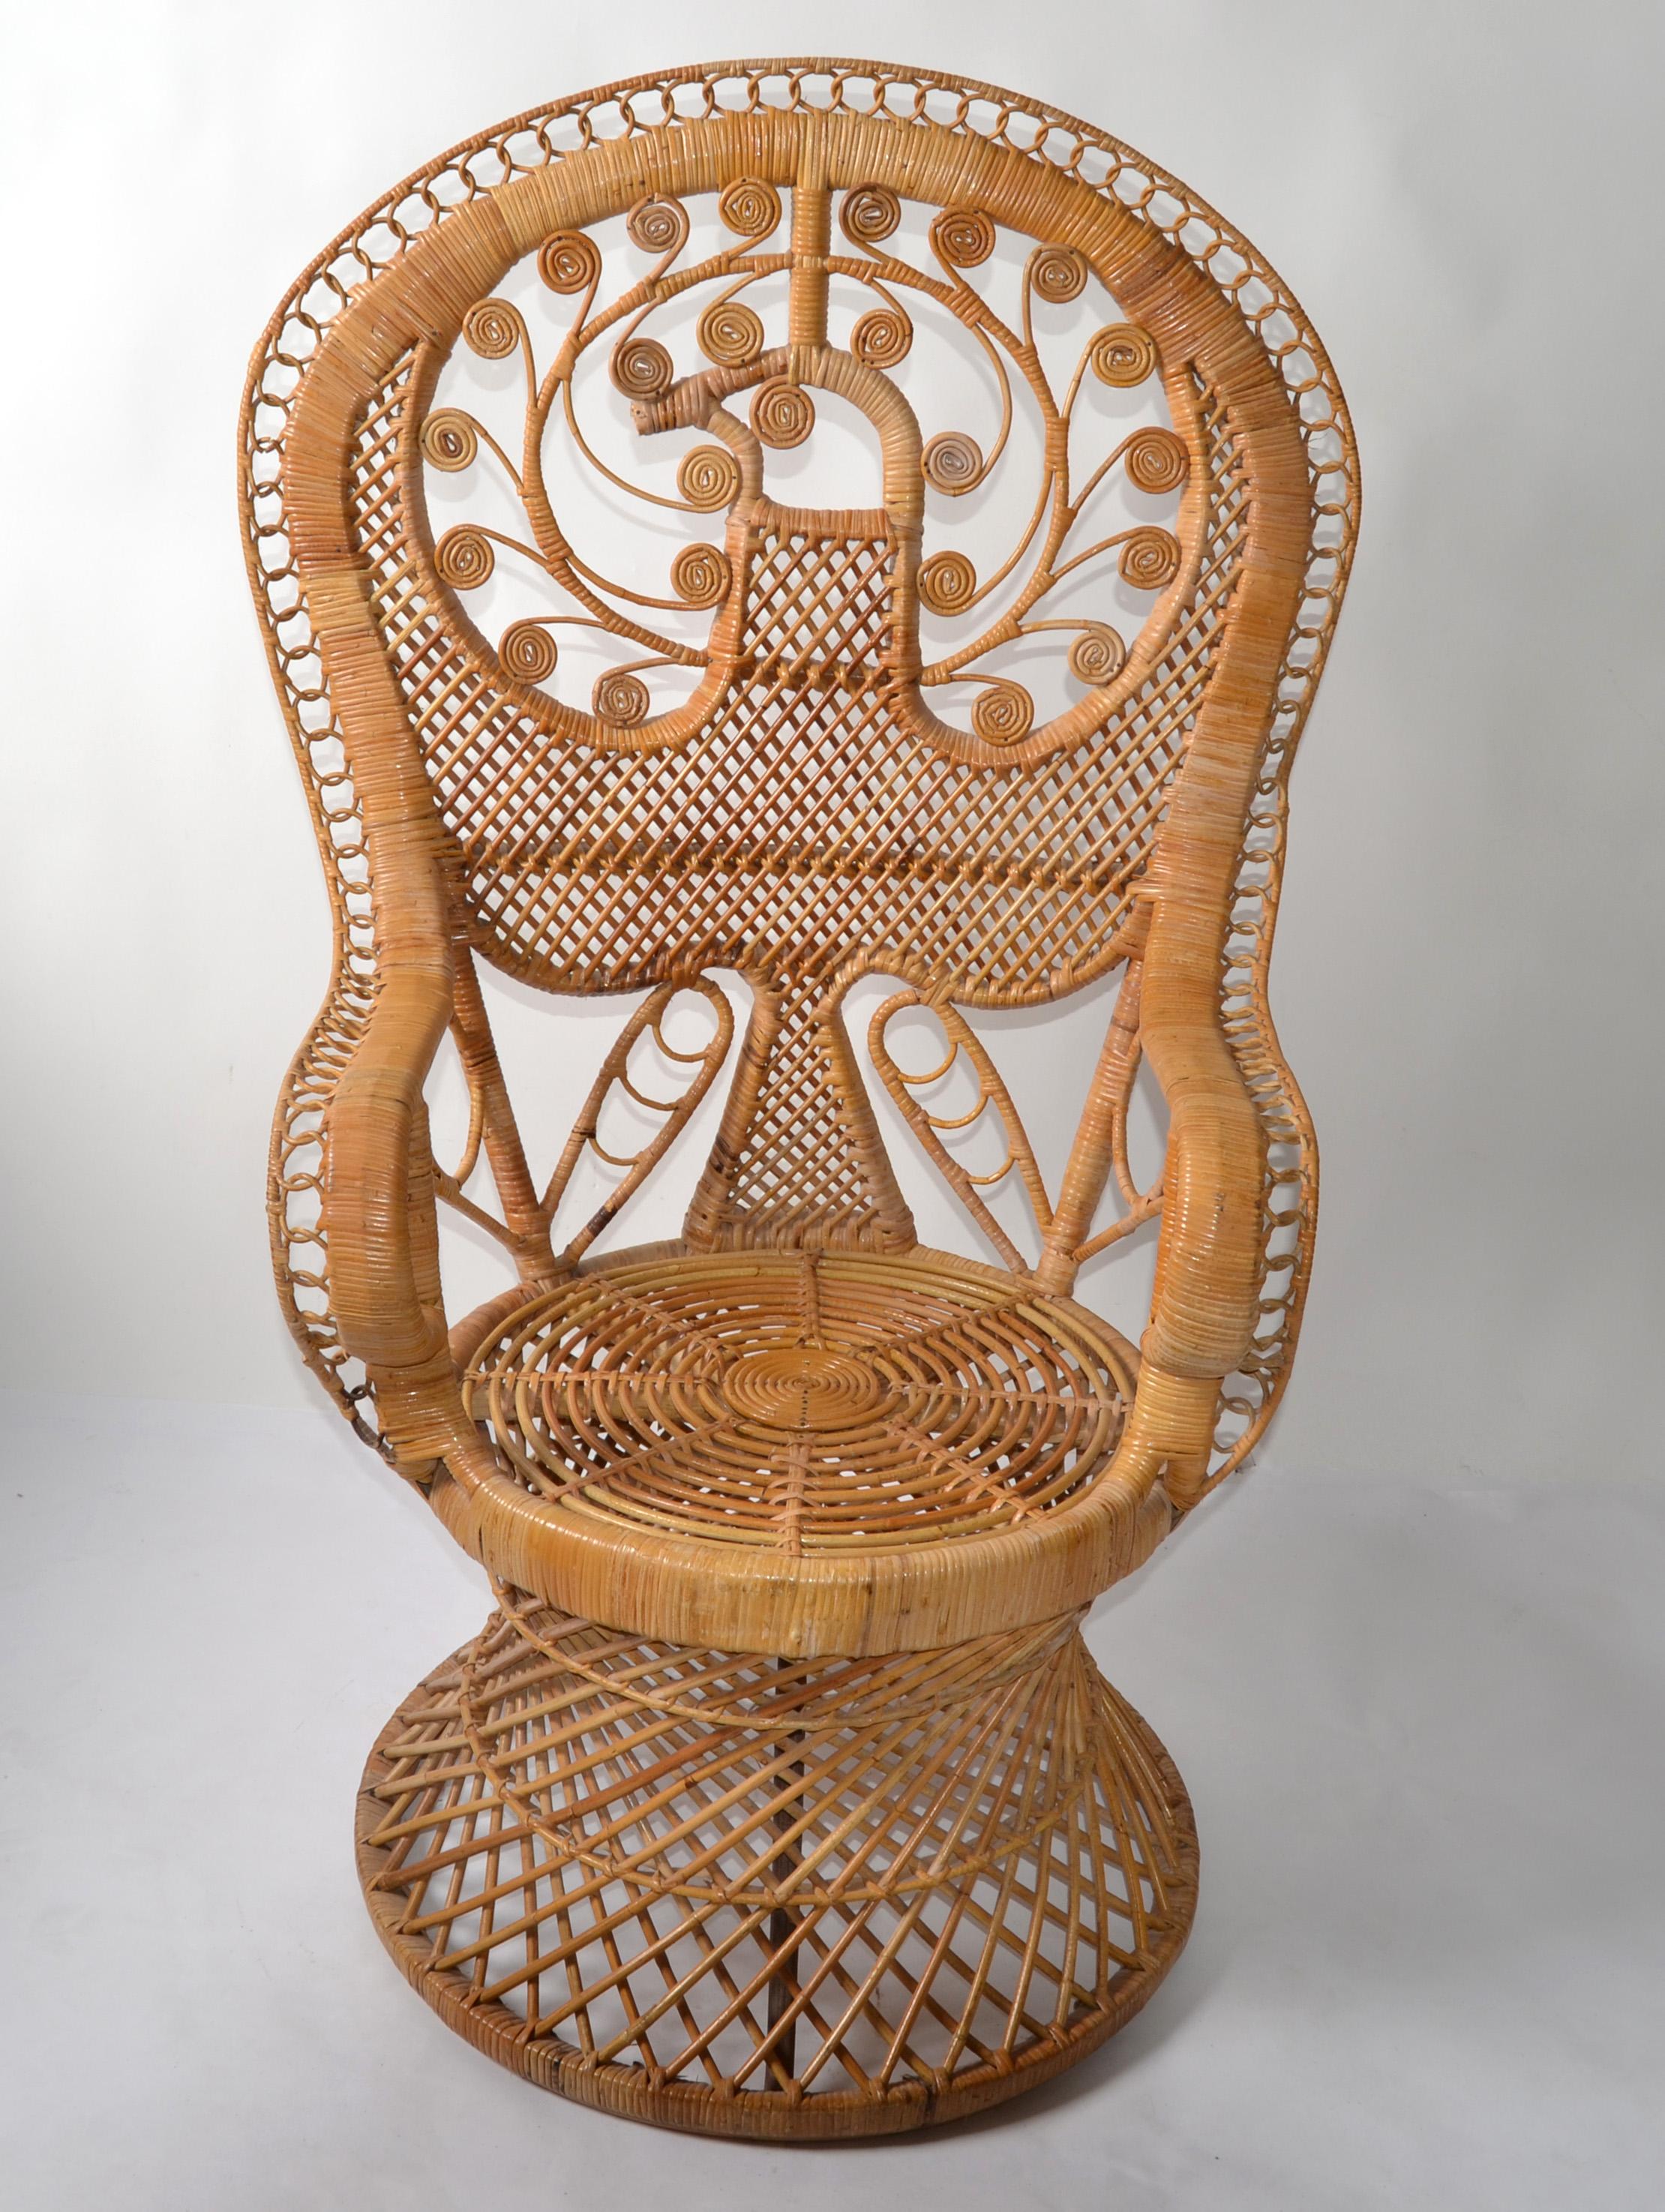 Chippendale chinois Coastal Vintage Round Rattan Accent Table Hand-Woven Wicker Caning Peacock Chair en vente